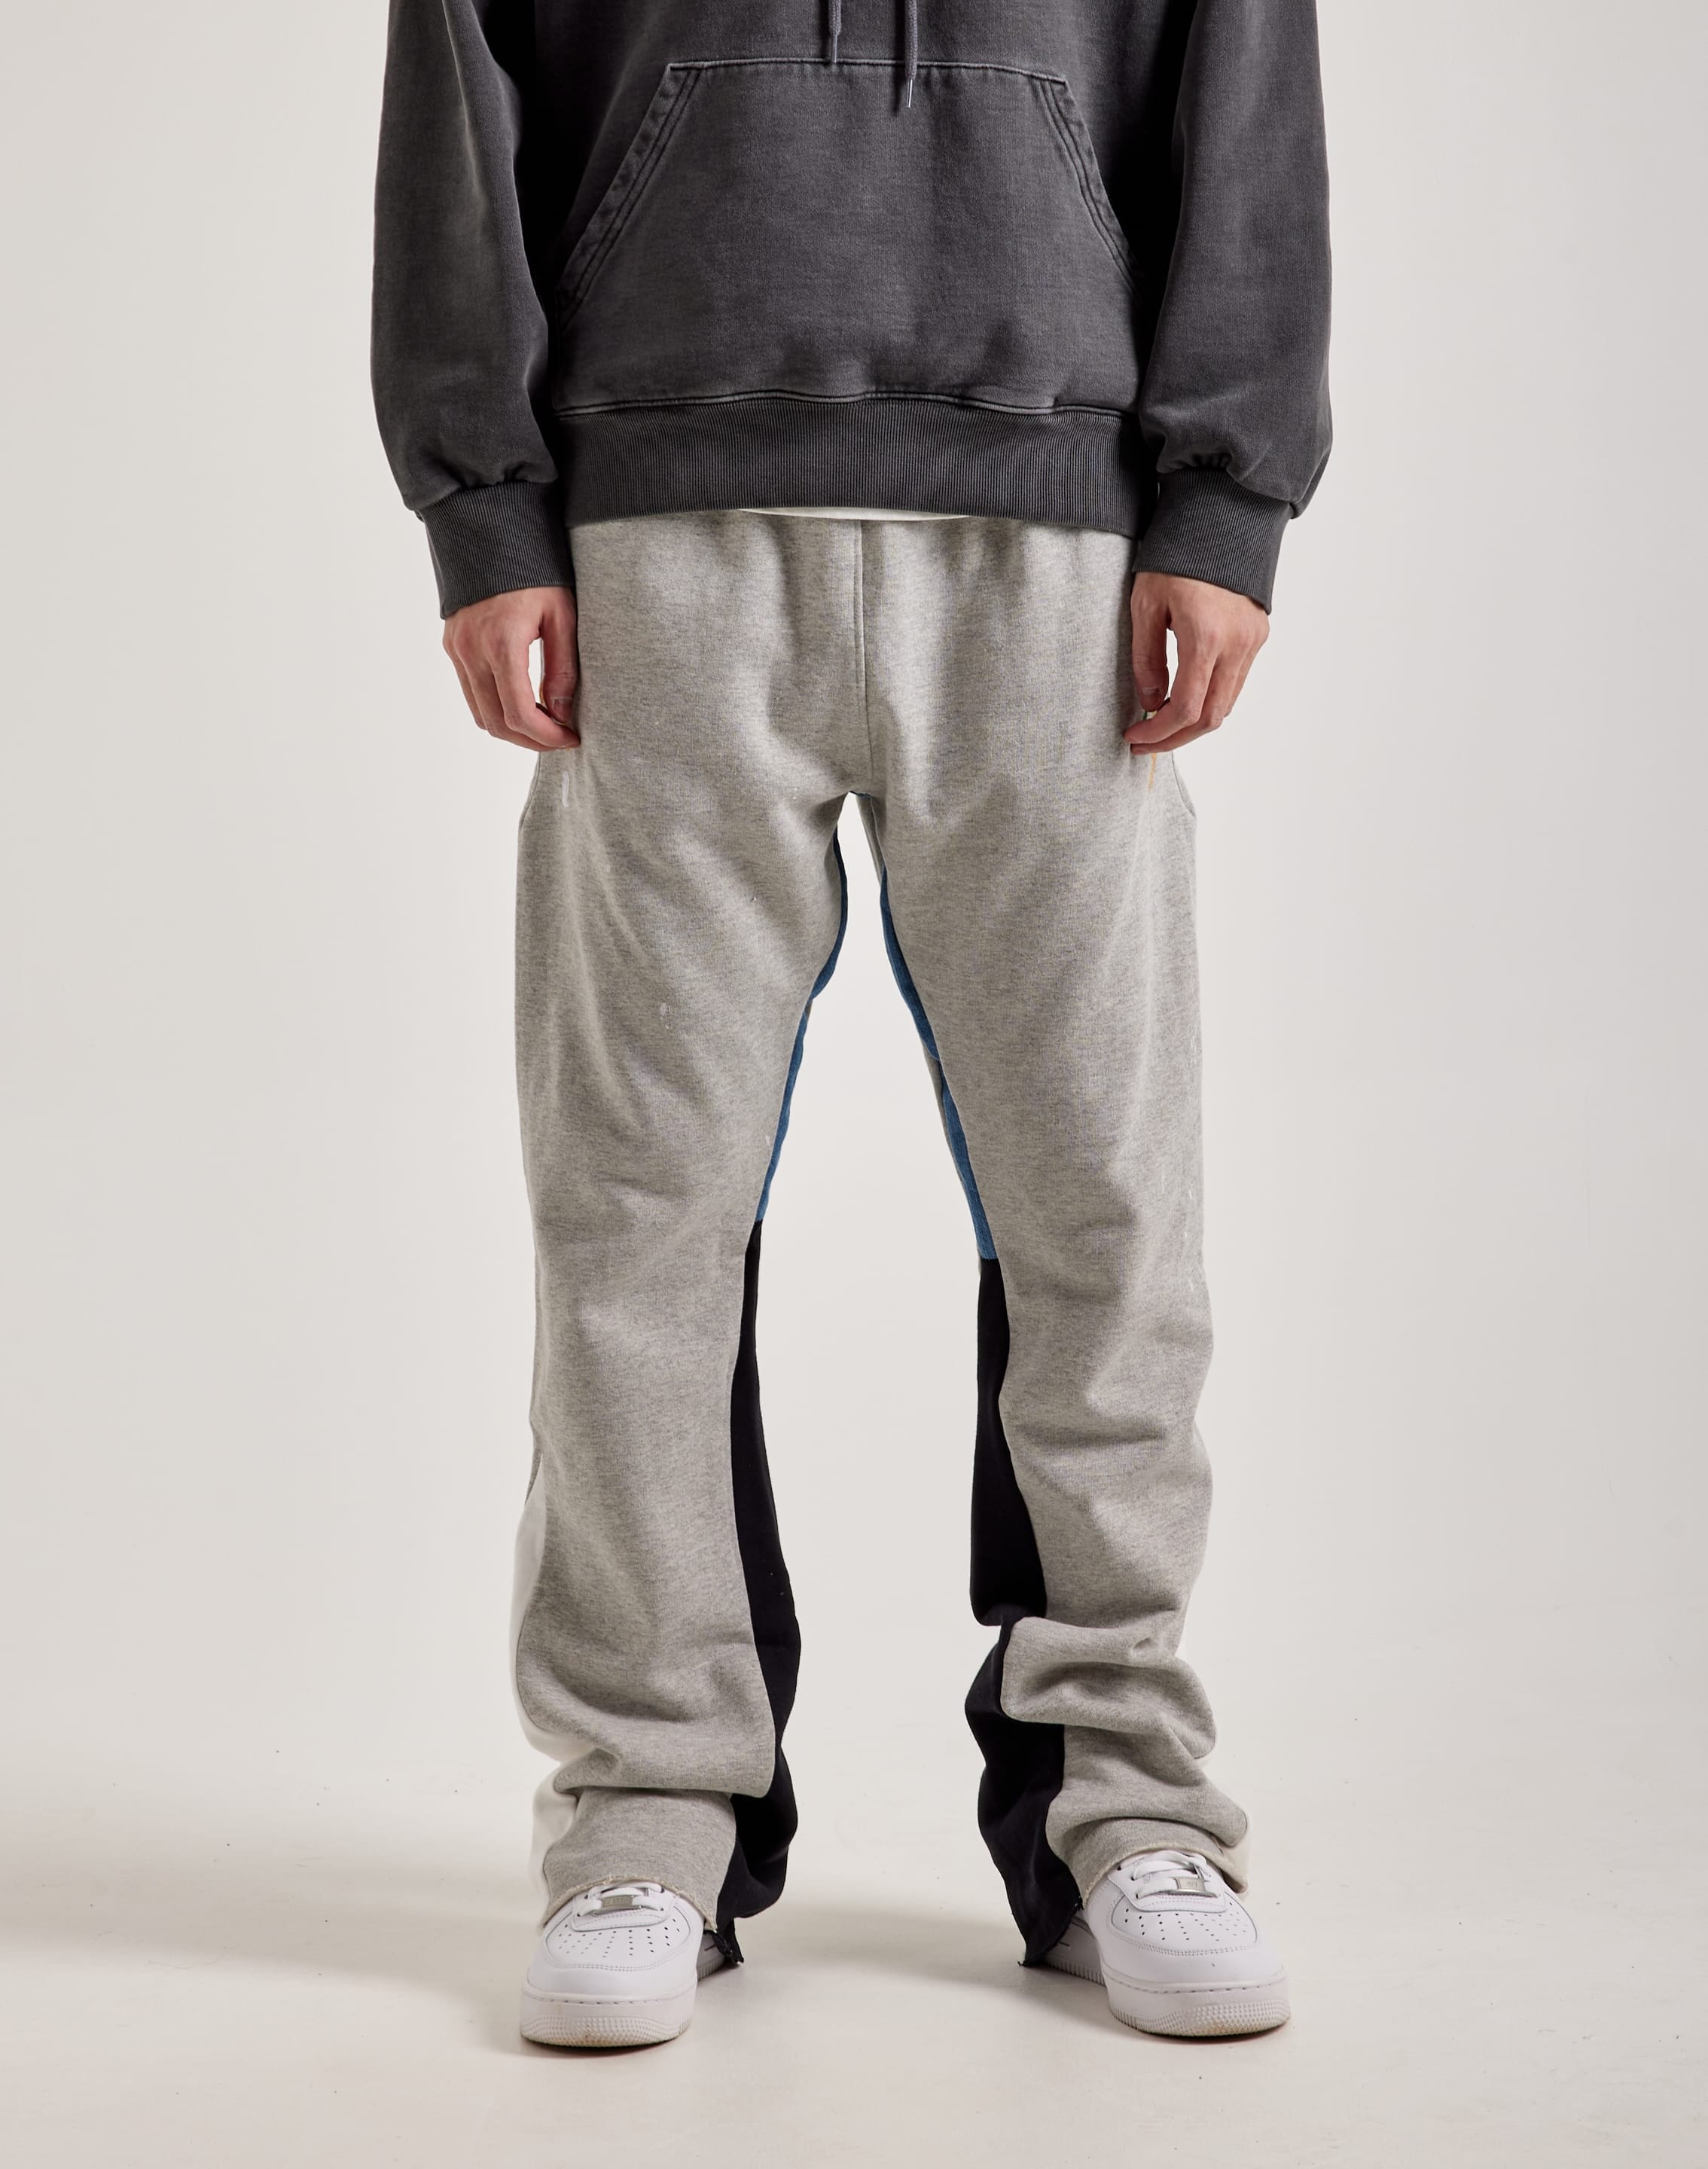 mnml - Contrast Bootcut Cargos + more restocks just dropped on